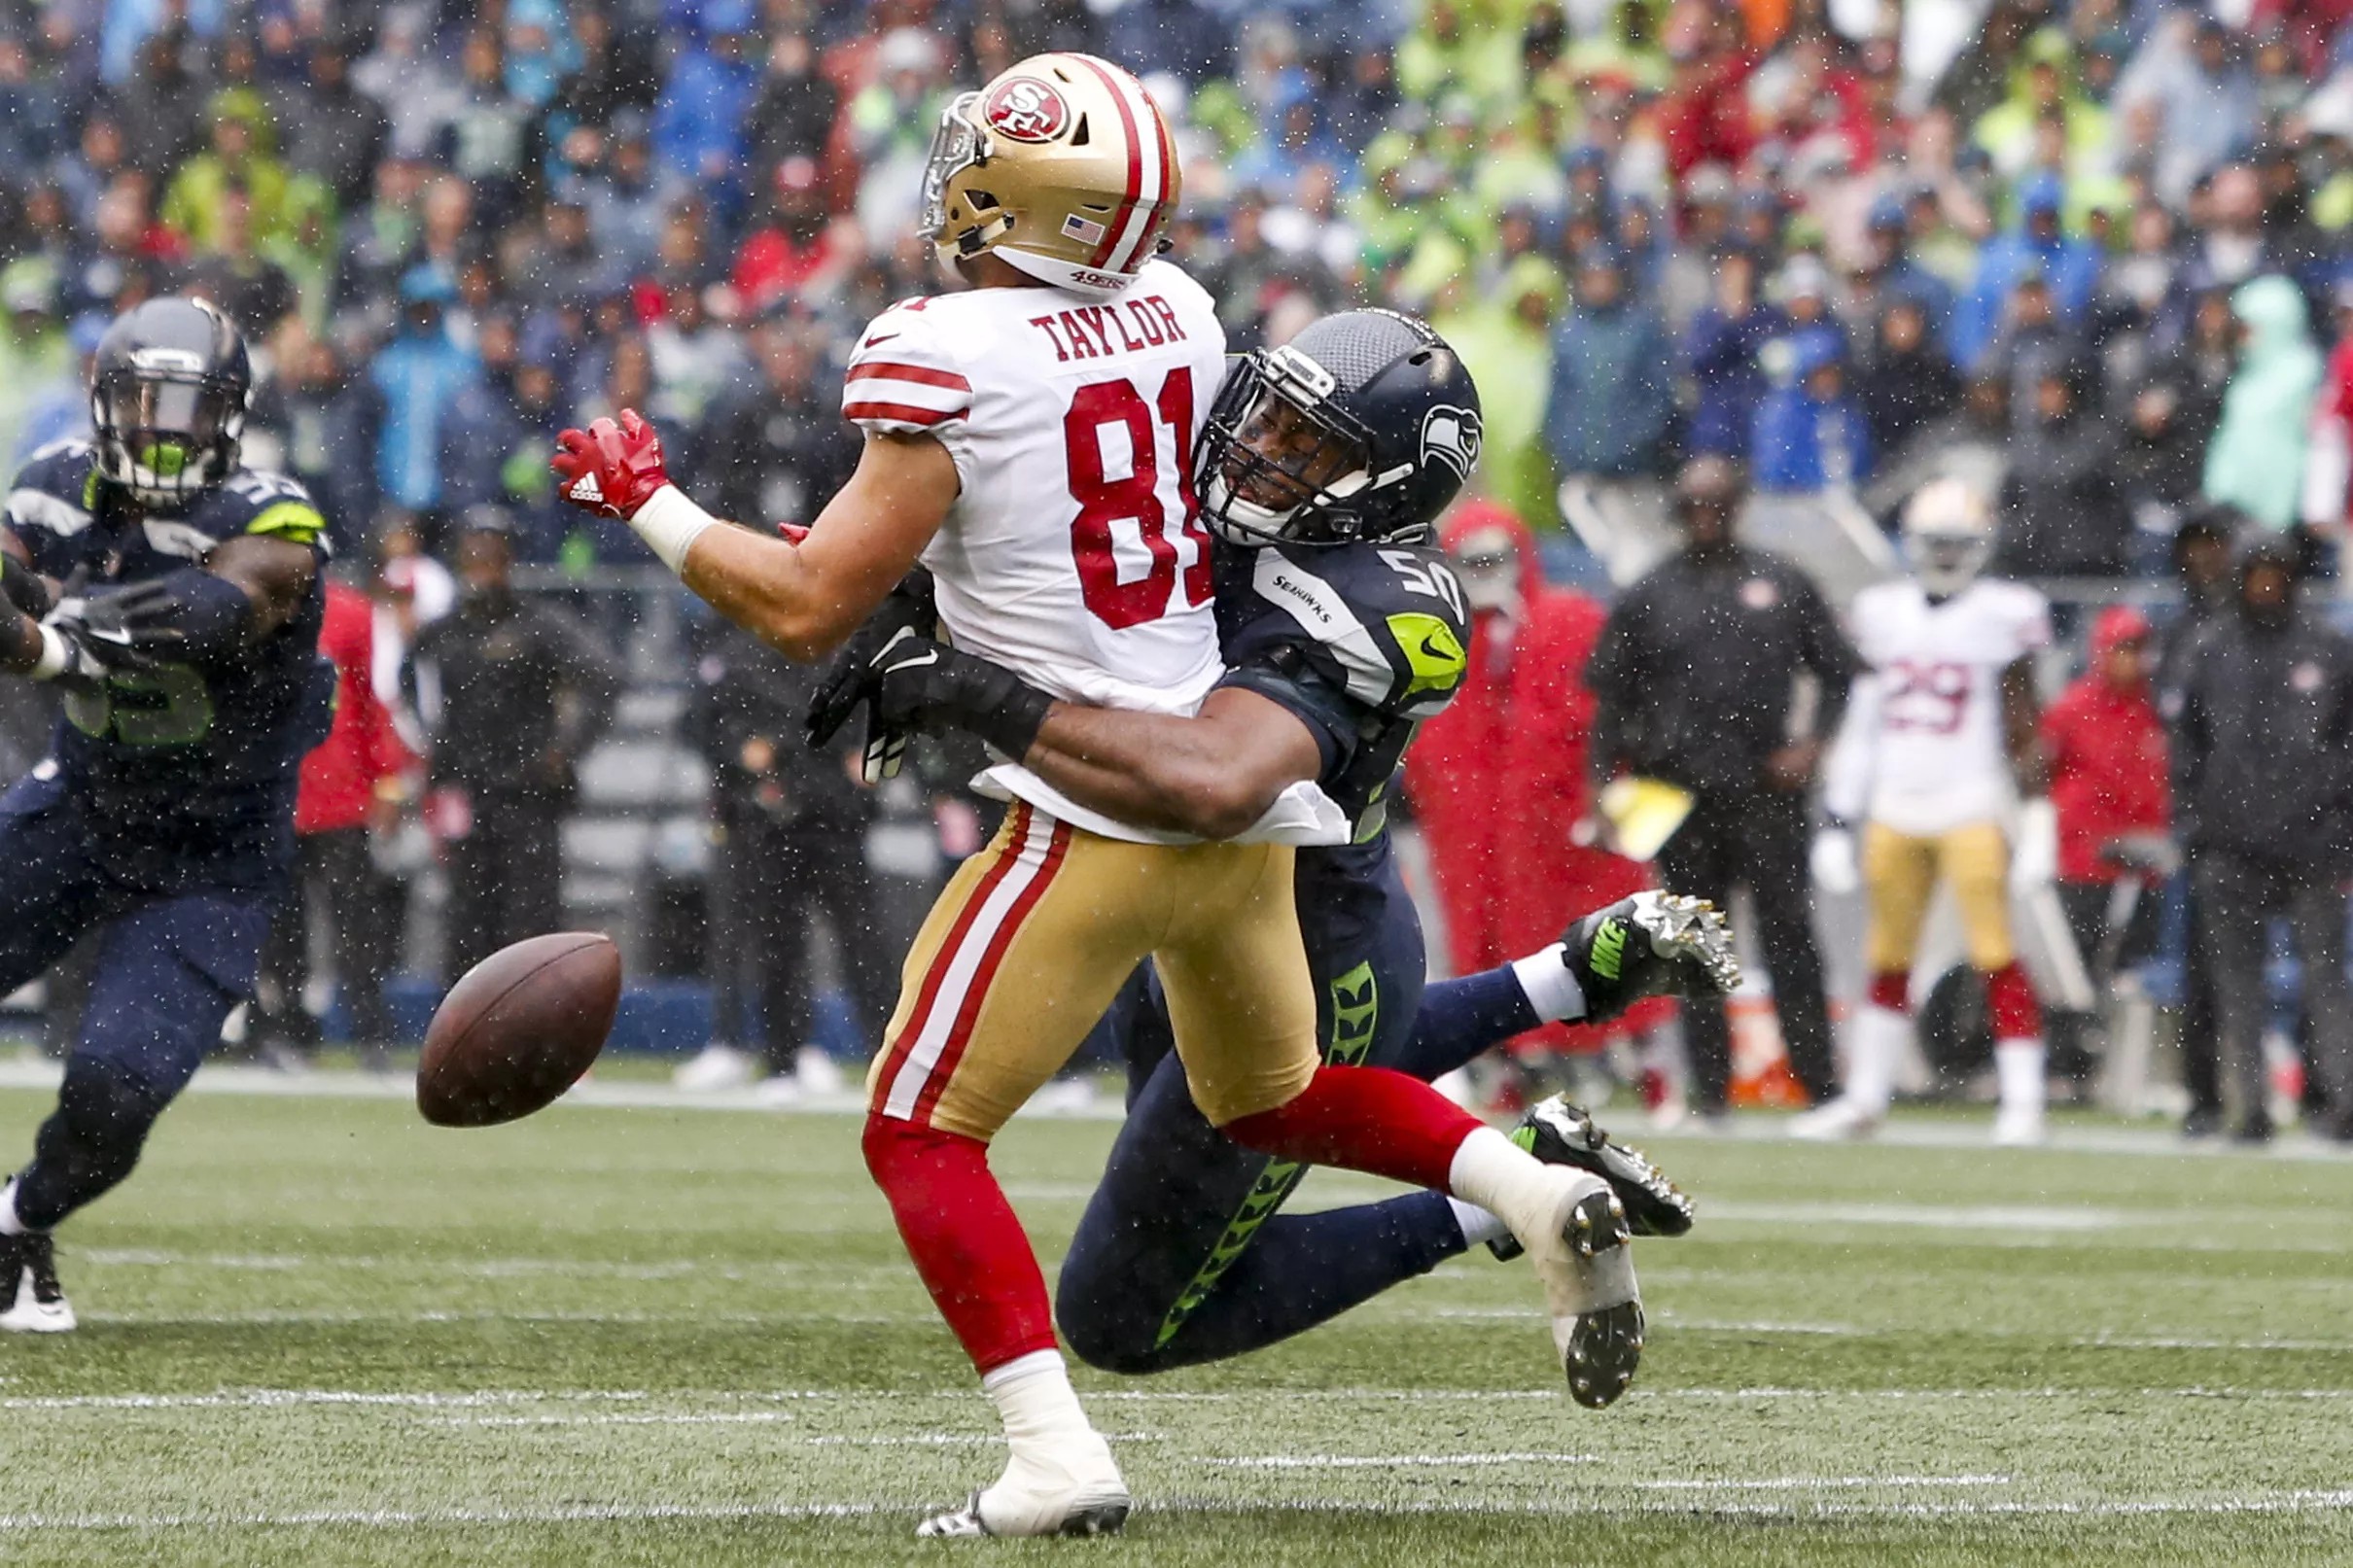 Seahawks-49ers game thread, 4th quarter: Both teams continue to avoid good offense